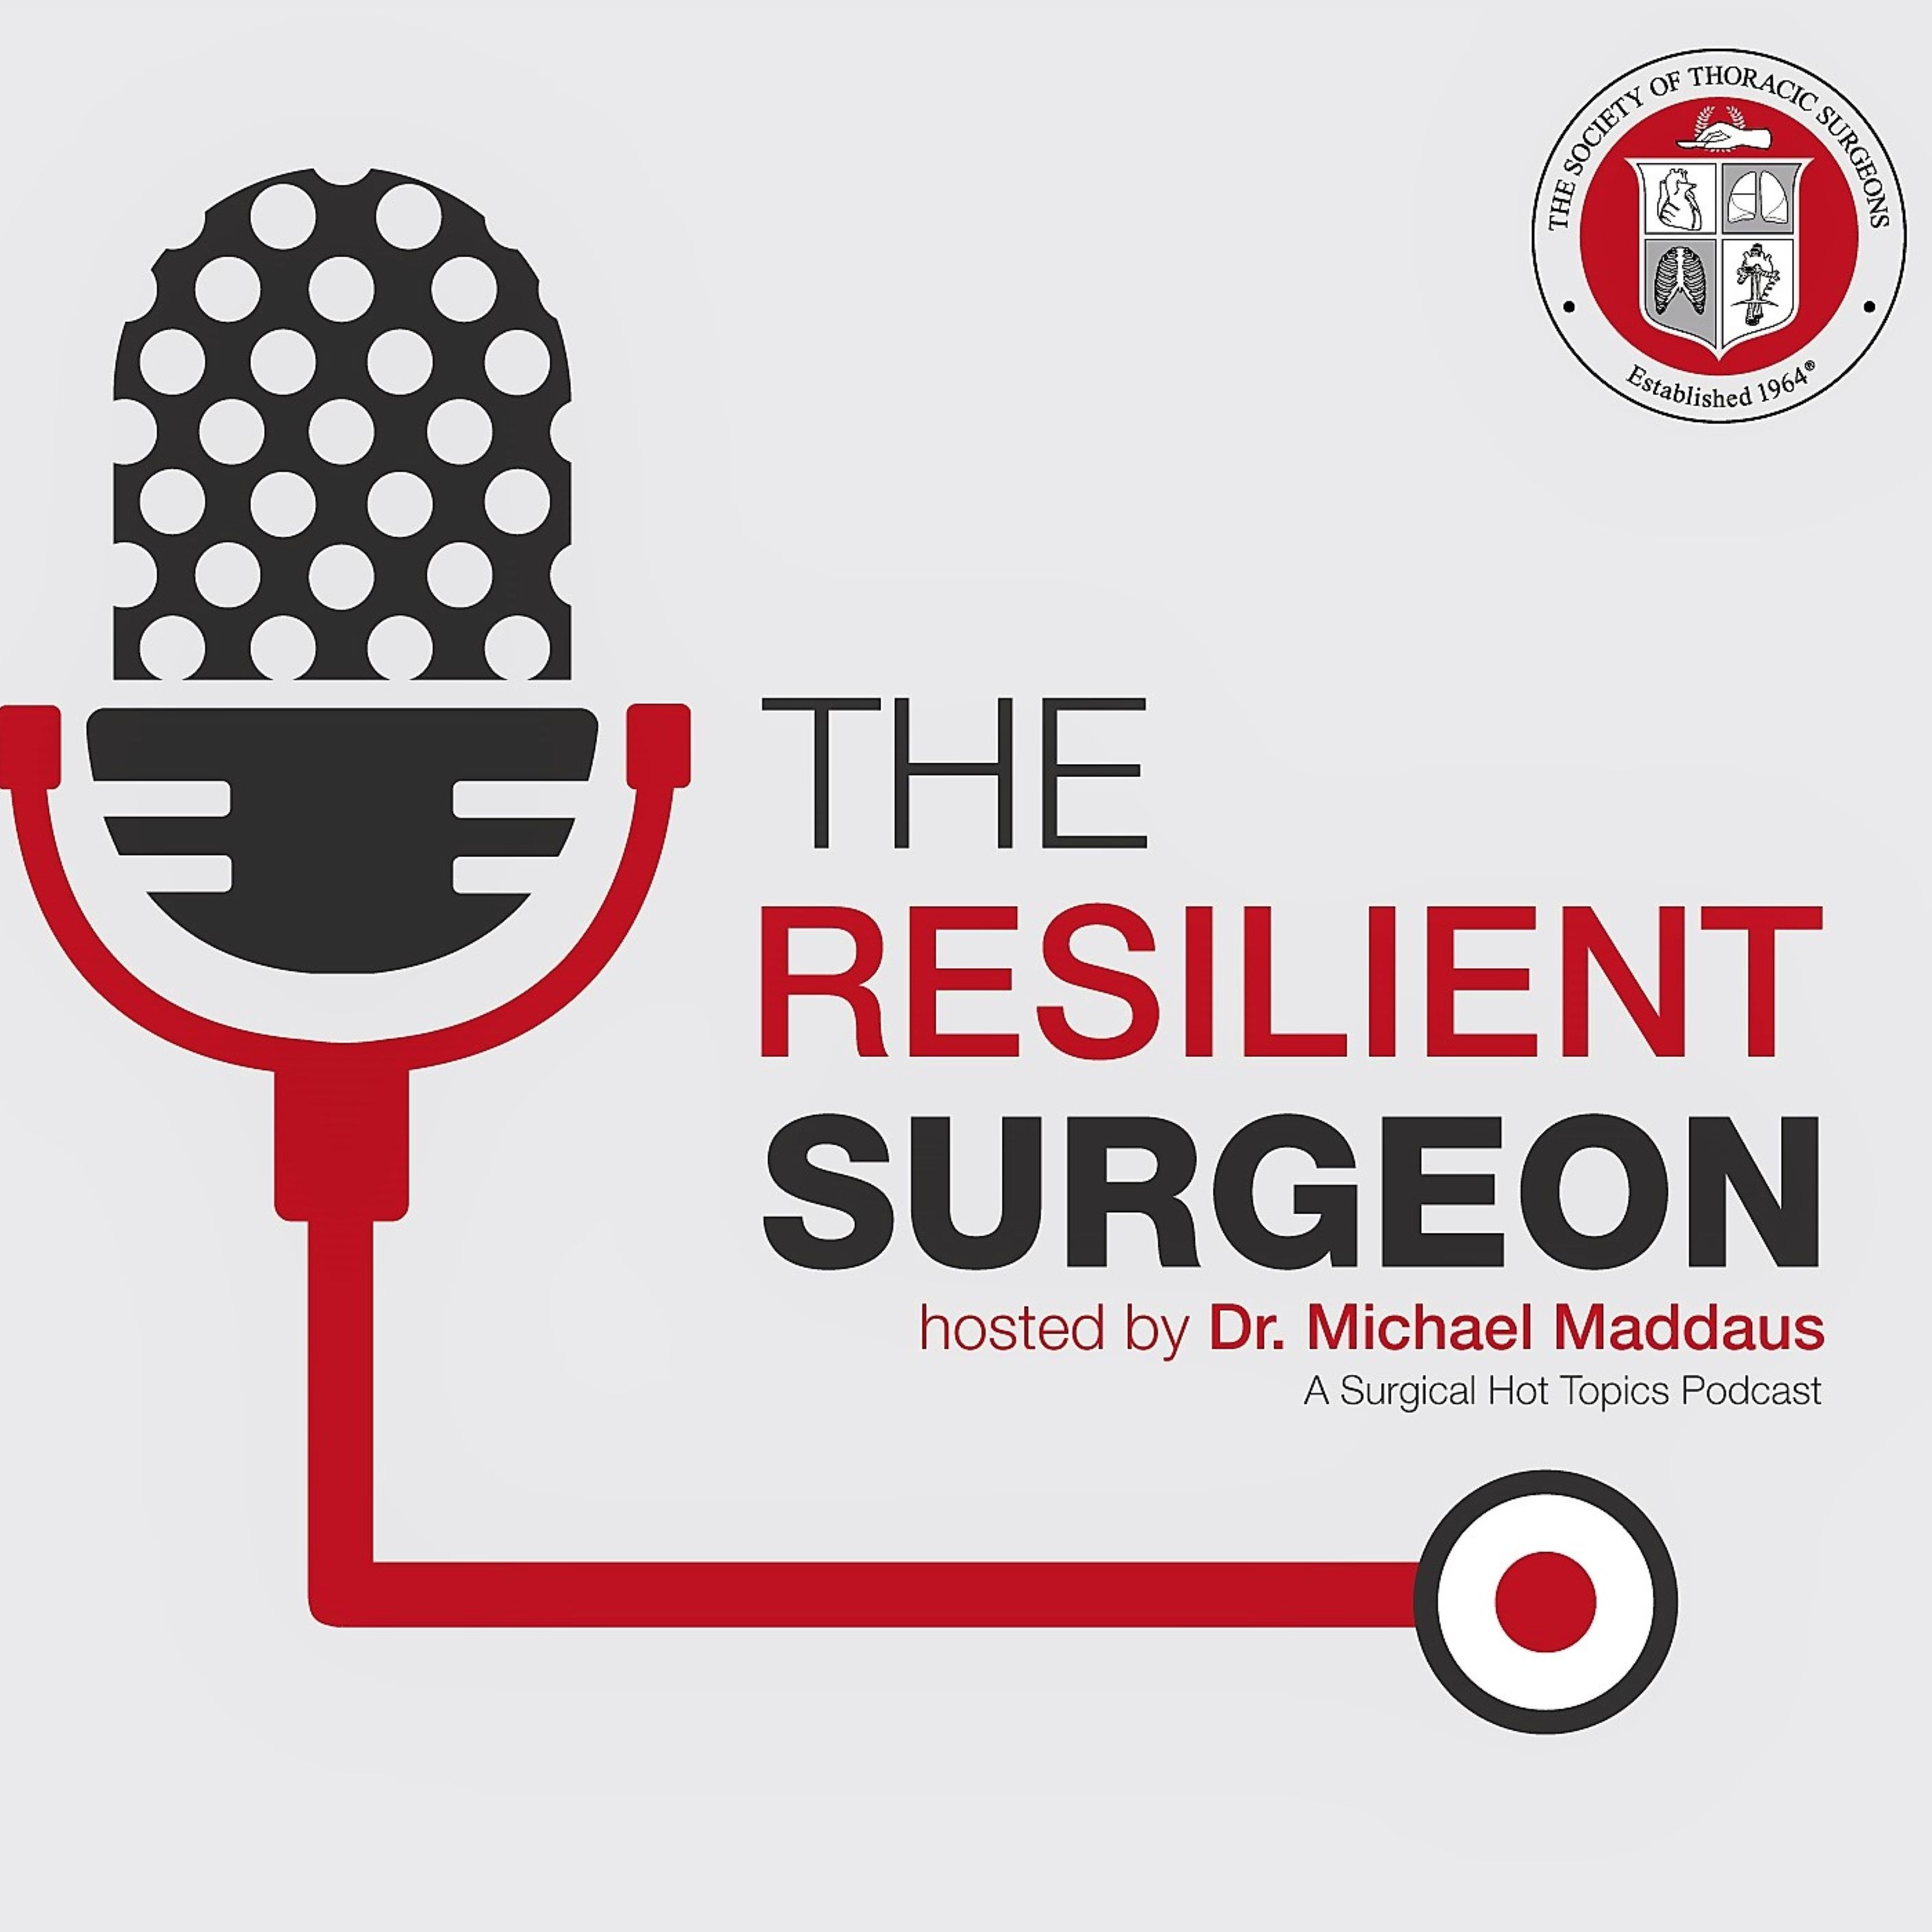 The STS Resilient Surgeon Podcast